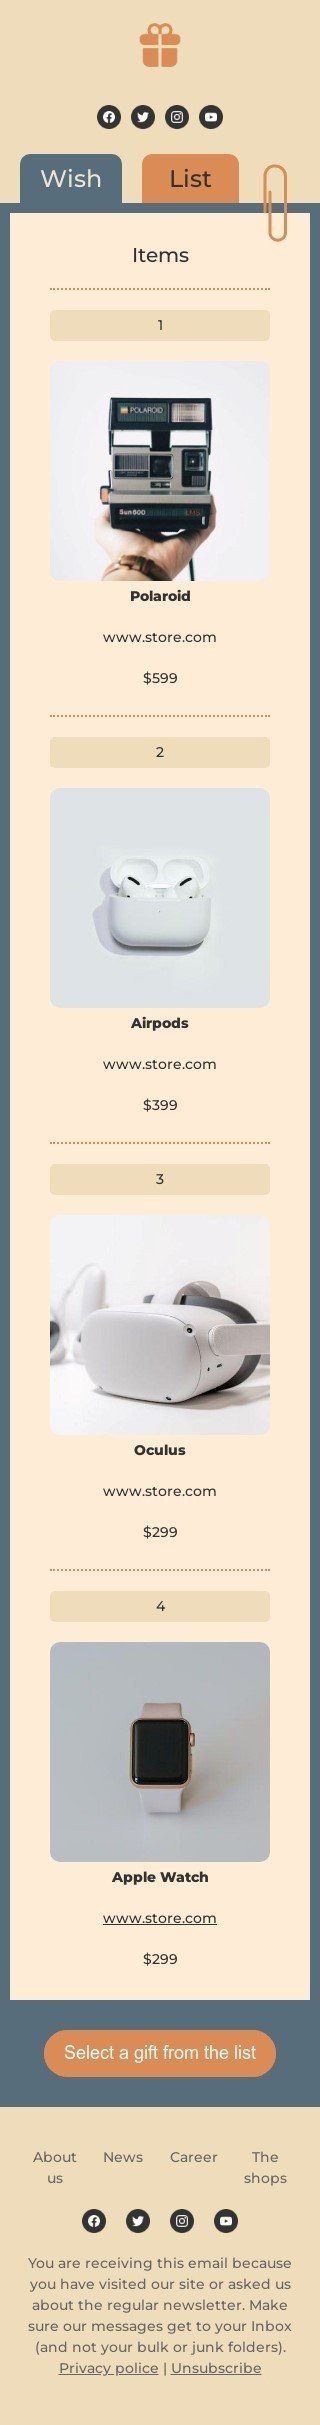 Promo email template «Wish list of gadgets» for gadgets industry mobile view